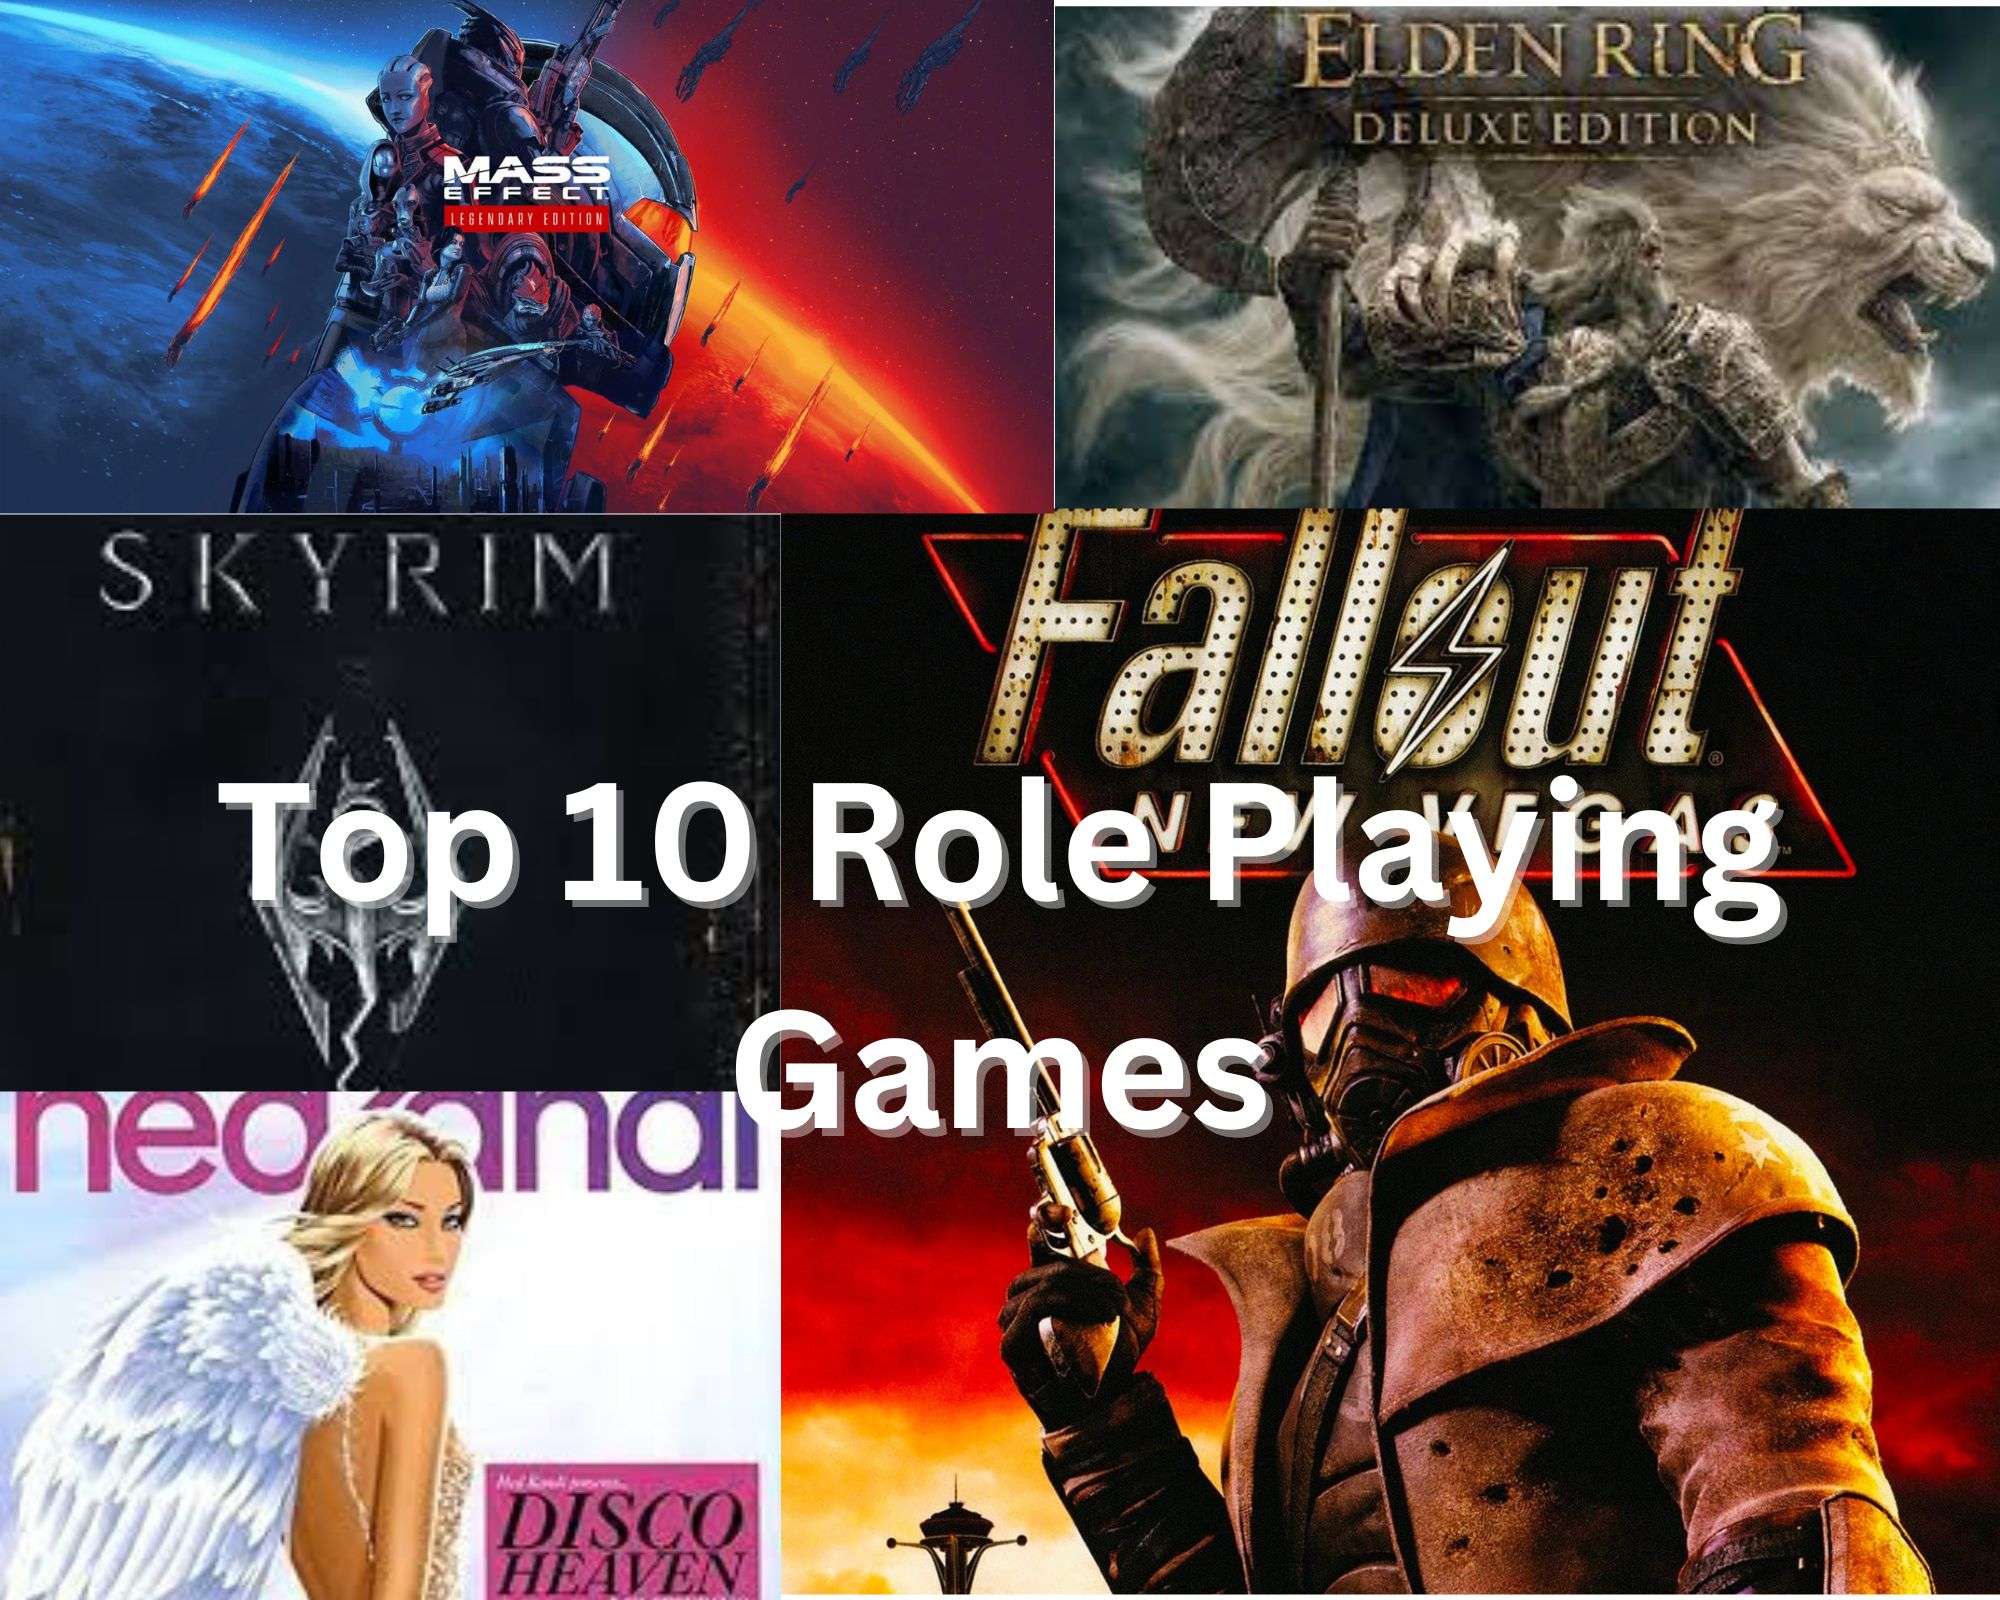 List of Top 10 Role Playing Games